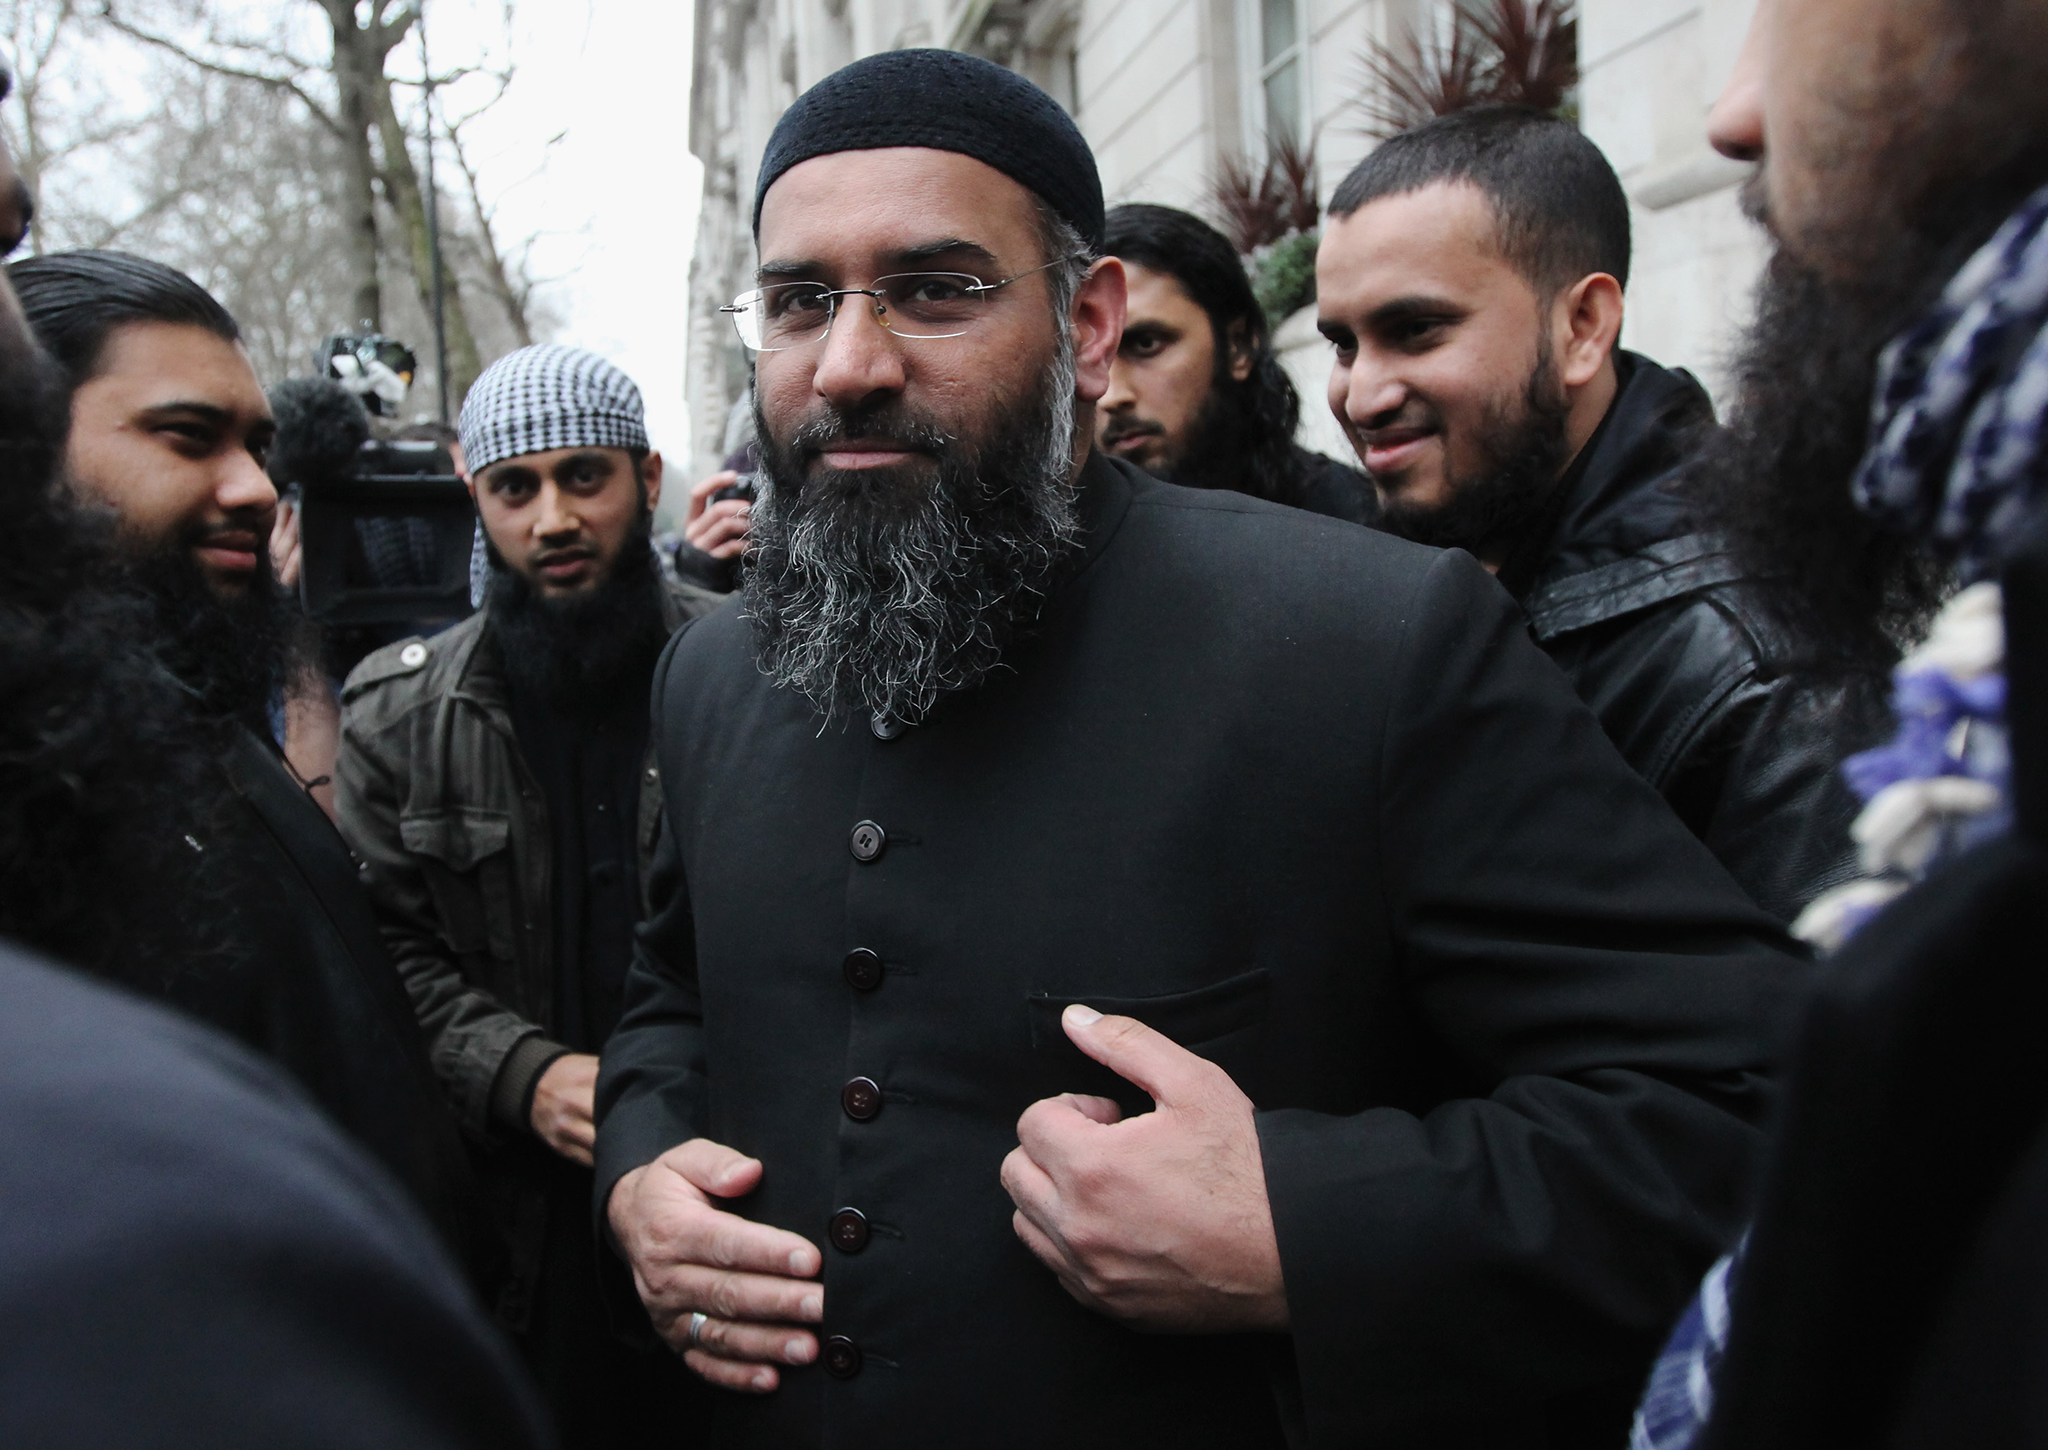 Anjem Choudhary leaving a press conference in Millbank Studios